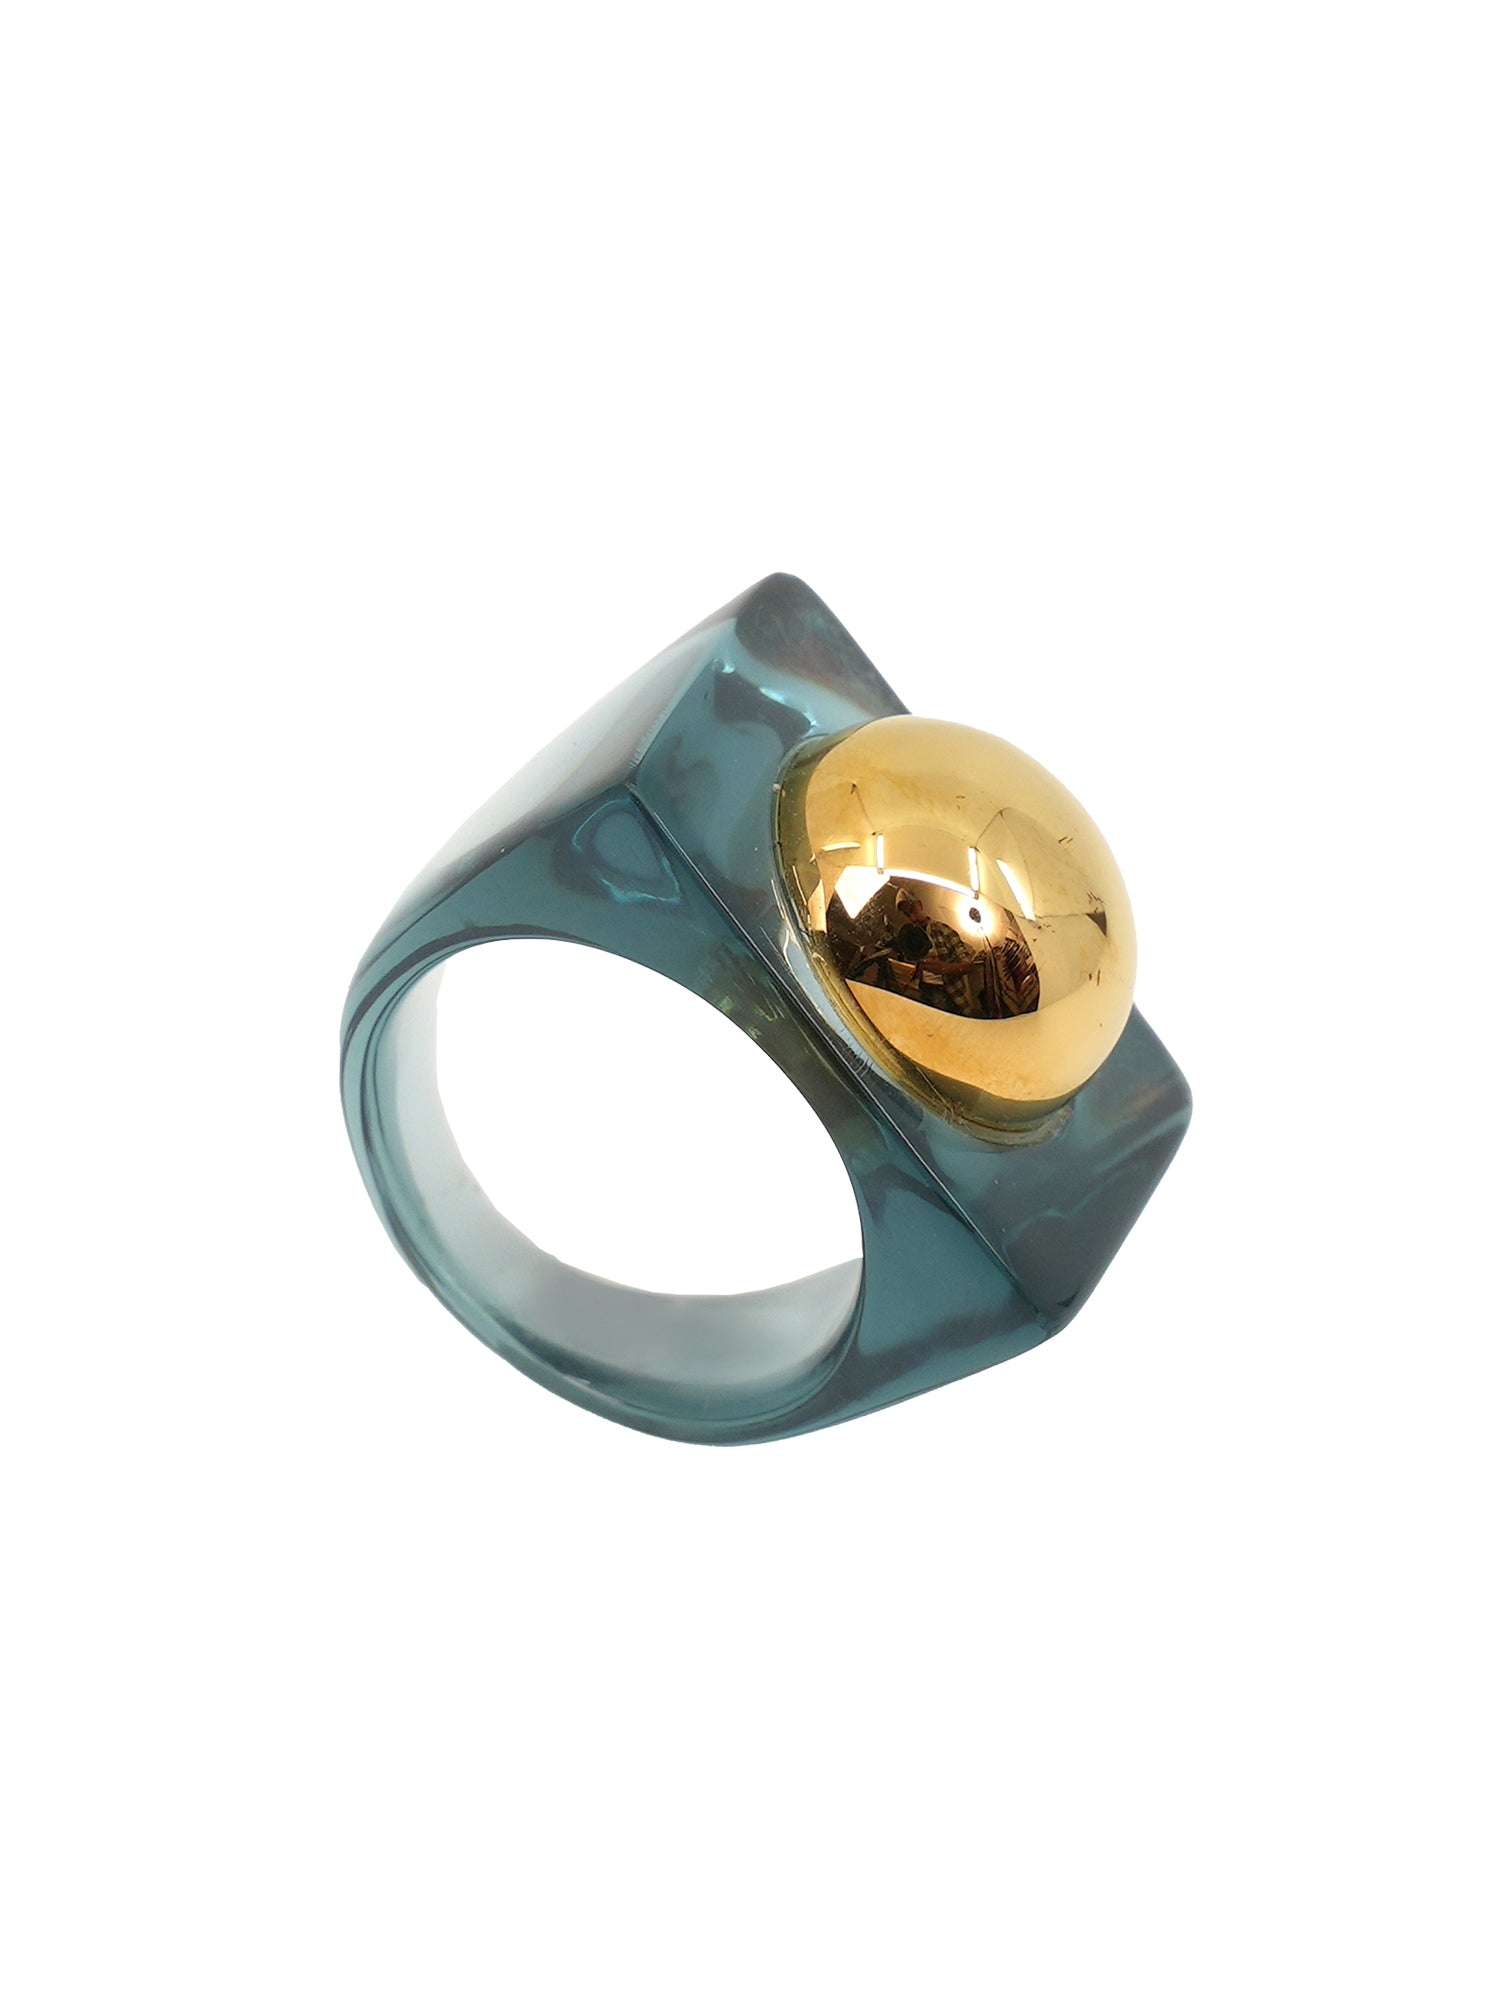 Resin Ring with Dome - Deep Blue / Gold